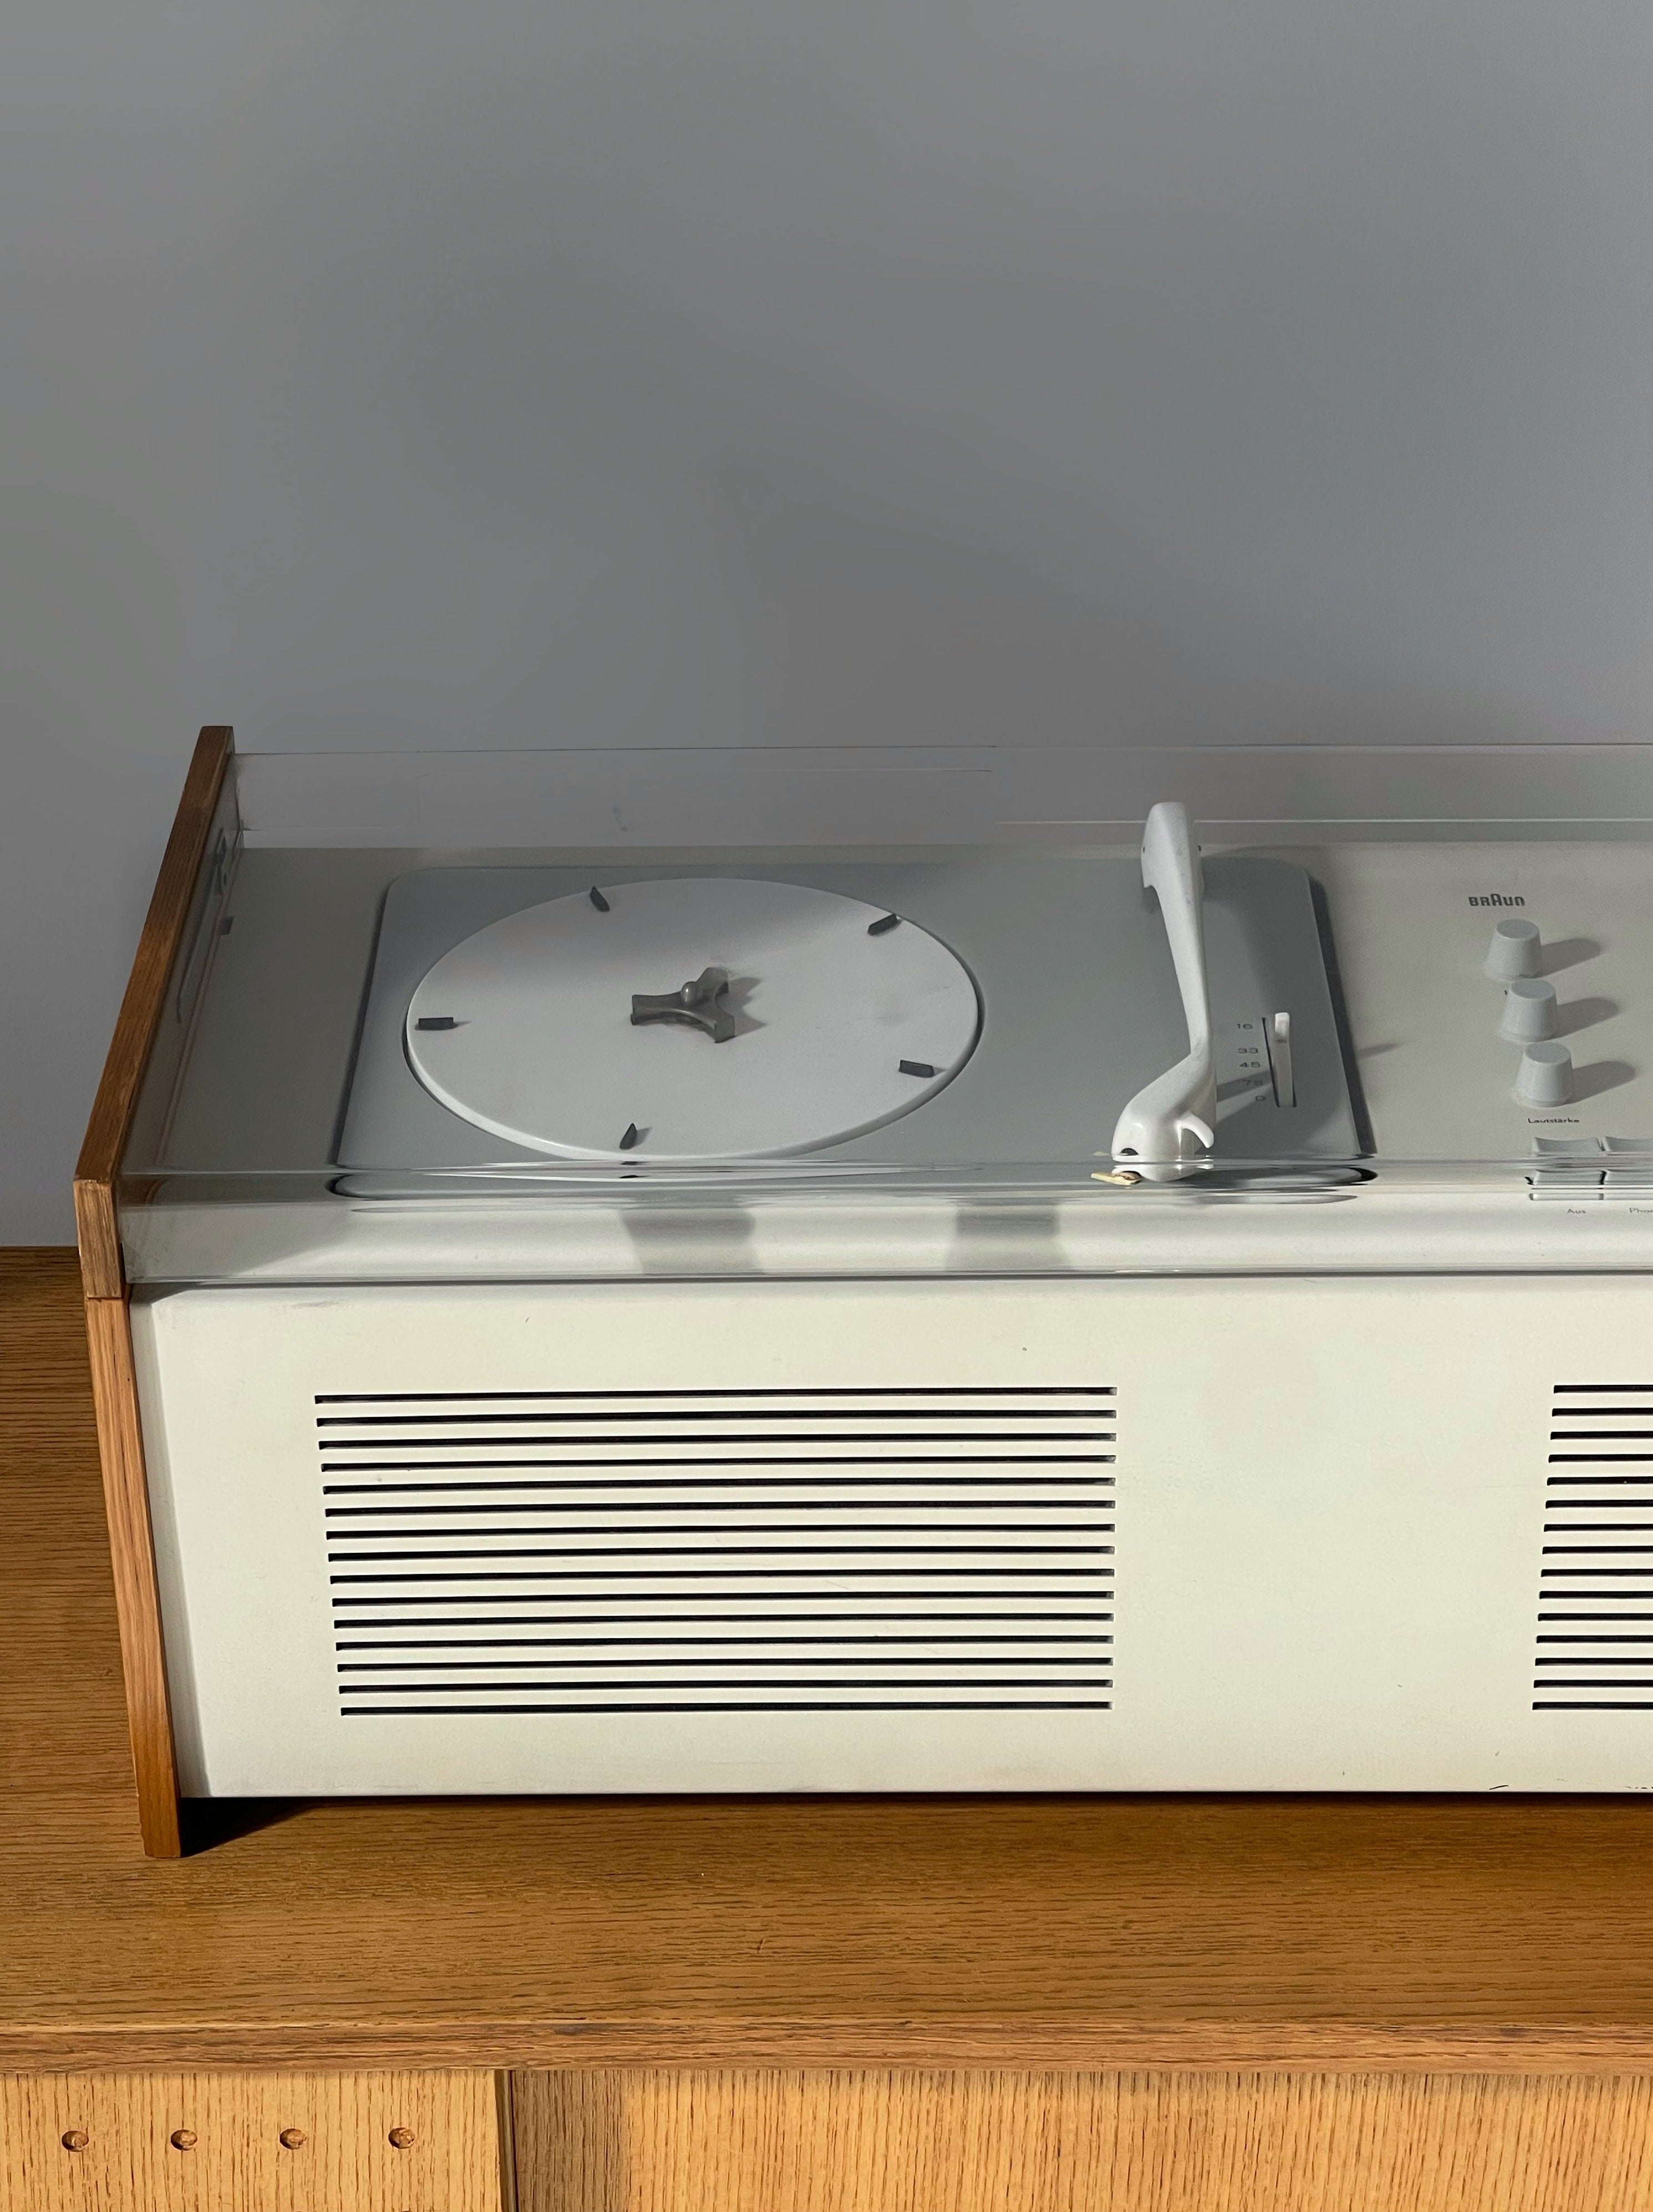 Braun audio: legendary stereo's from the 60s and 70s by Dieter Rams